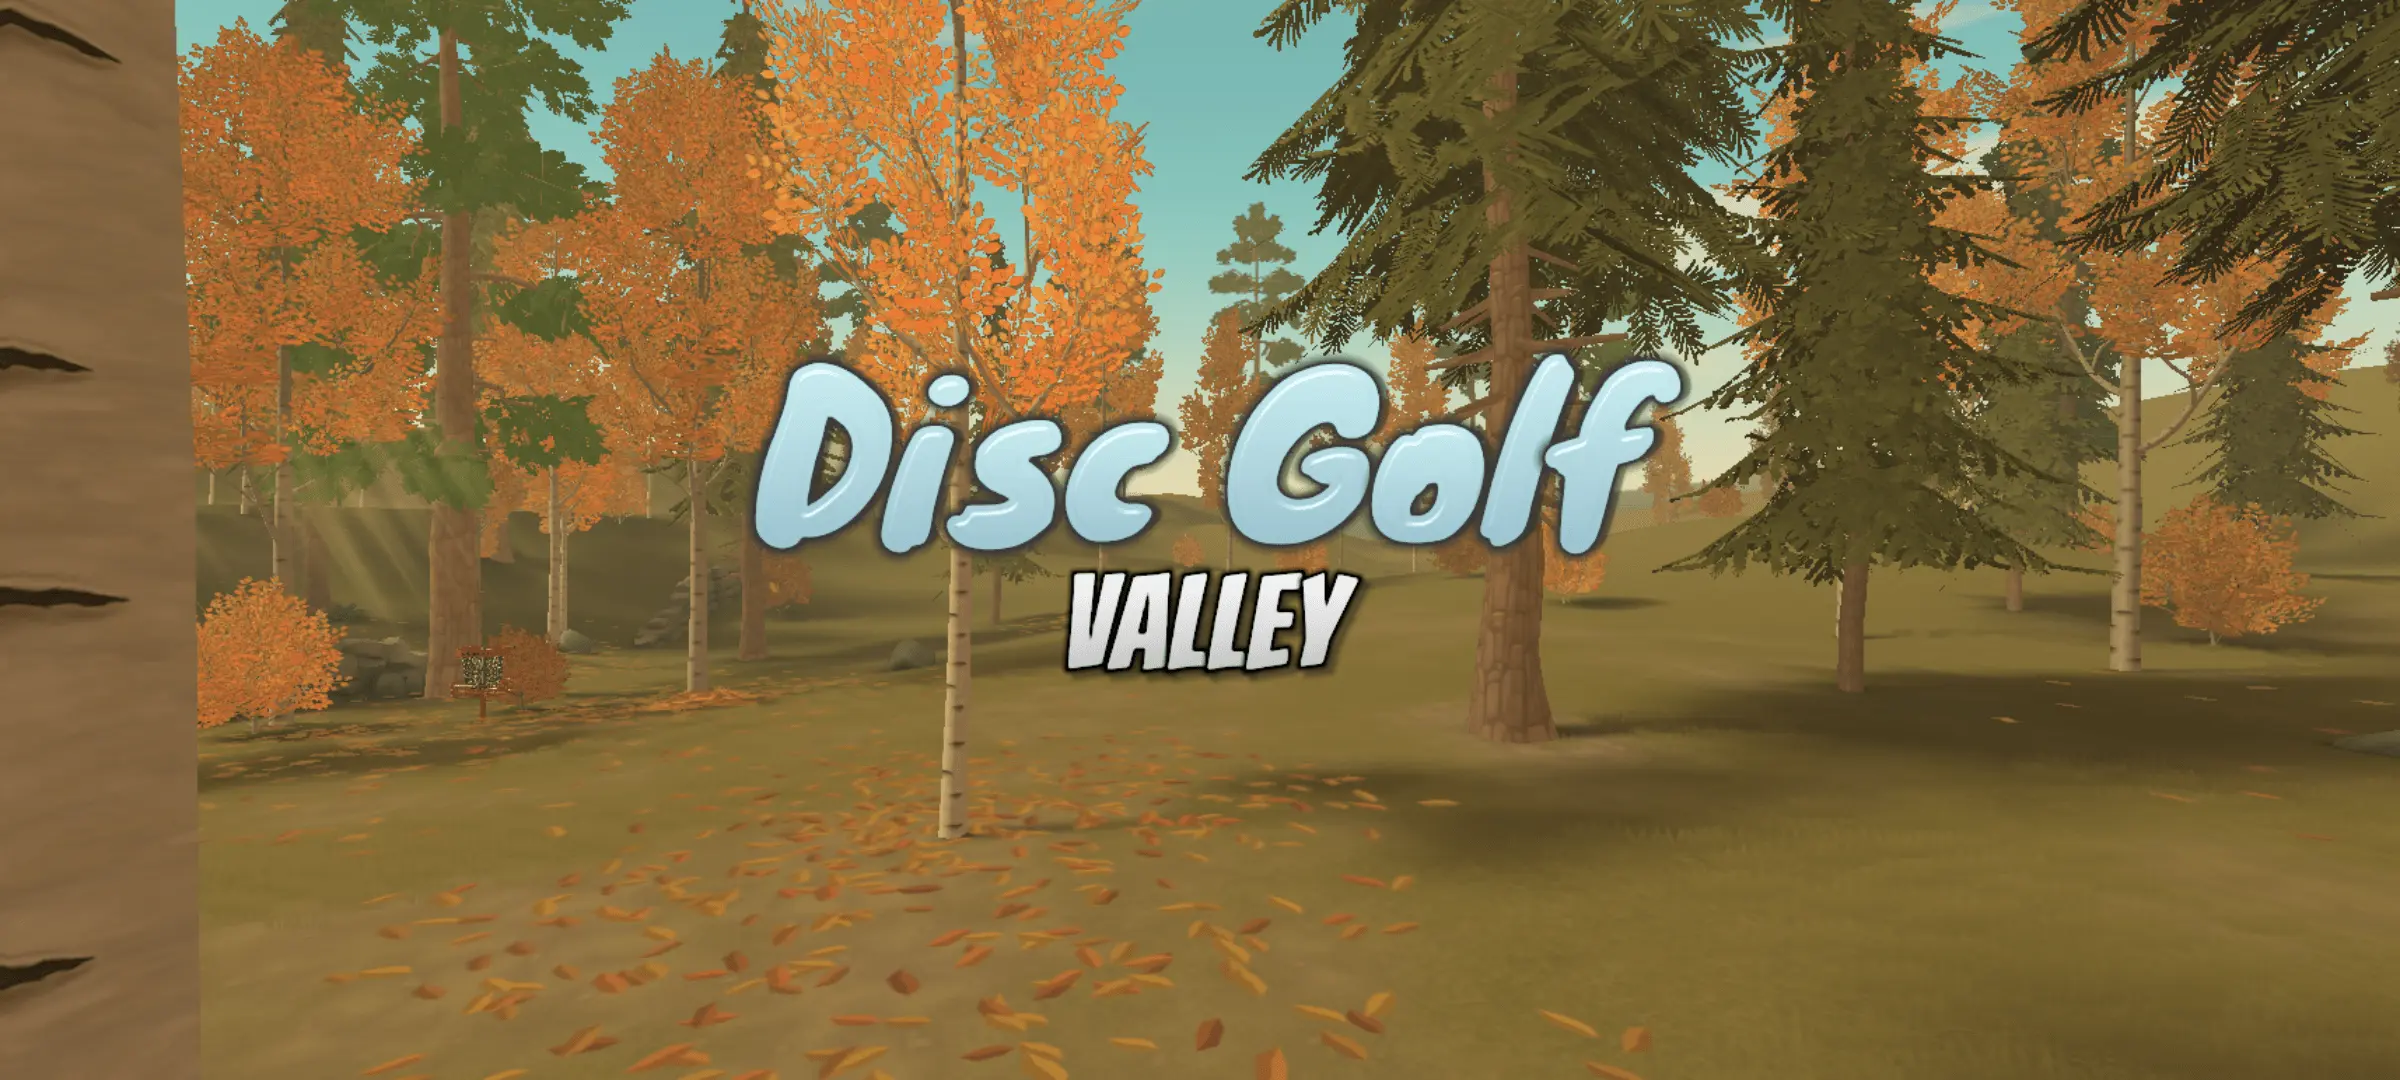 Disc Golf Valley title screen with autumn trees